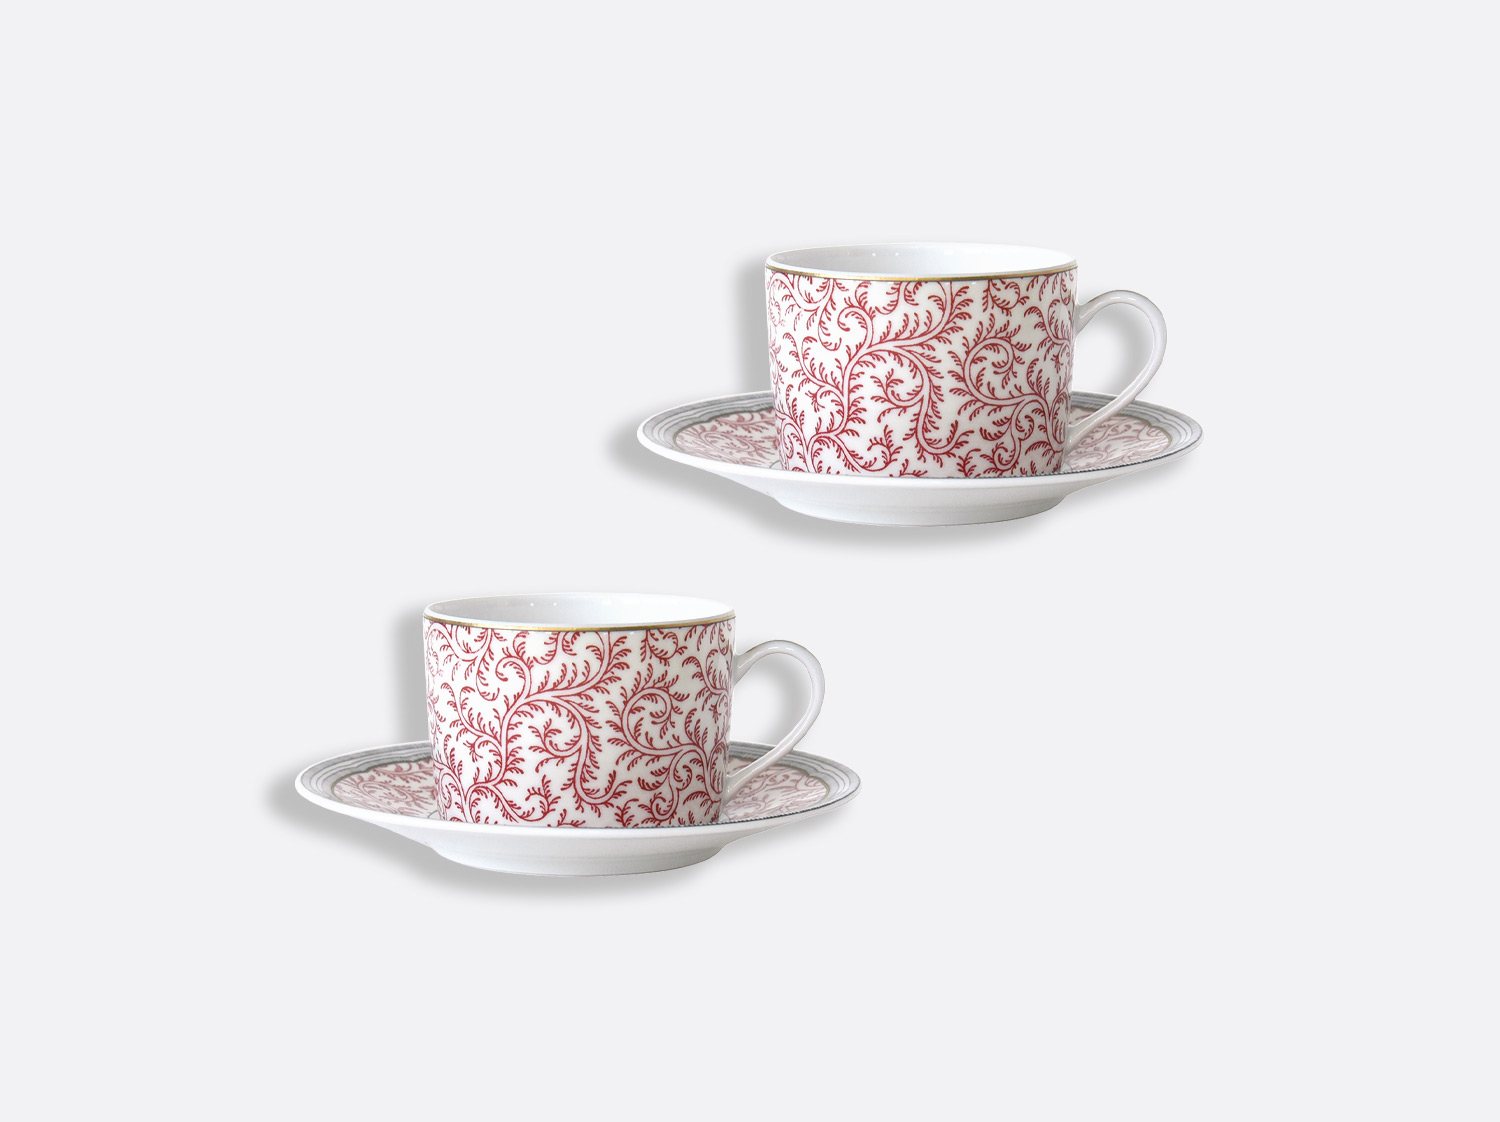 China set of 2 of the collection Collection Braquenié | Bernardaud